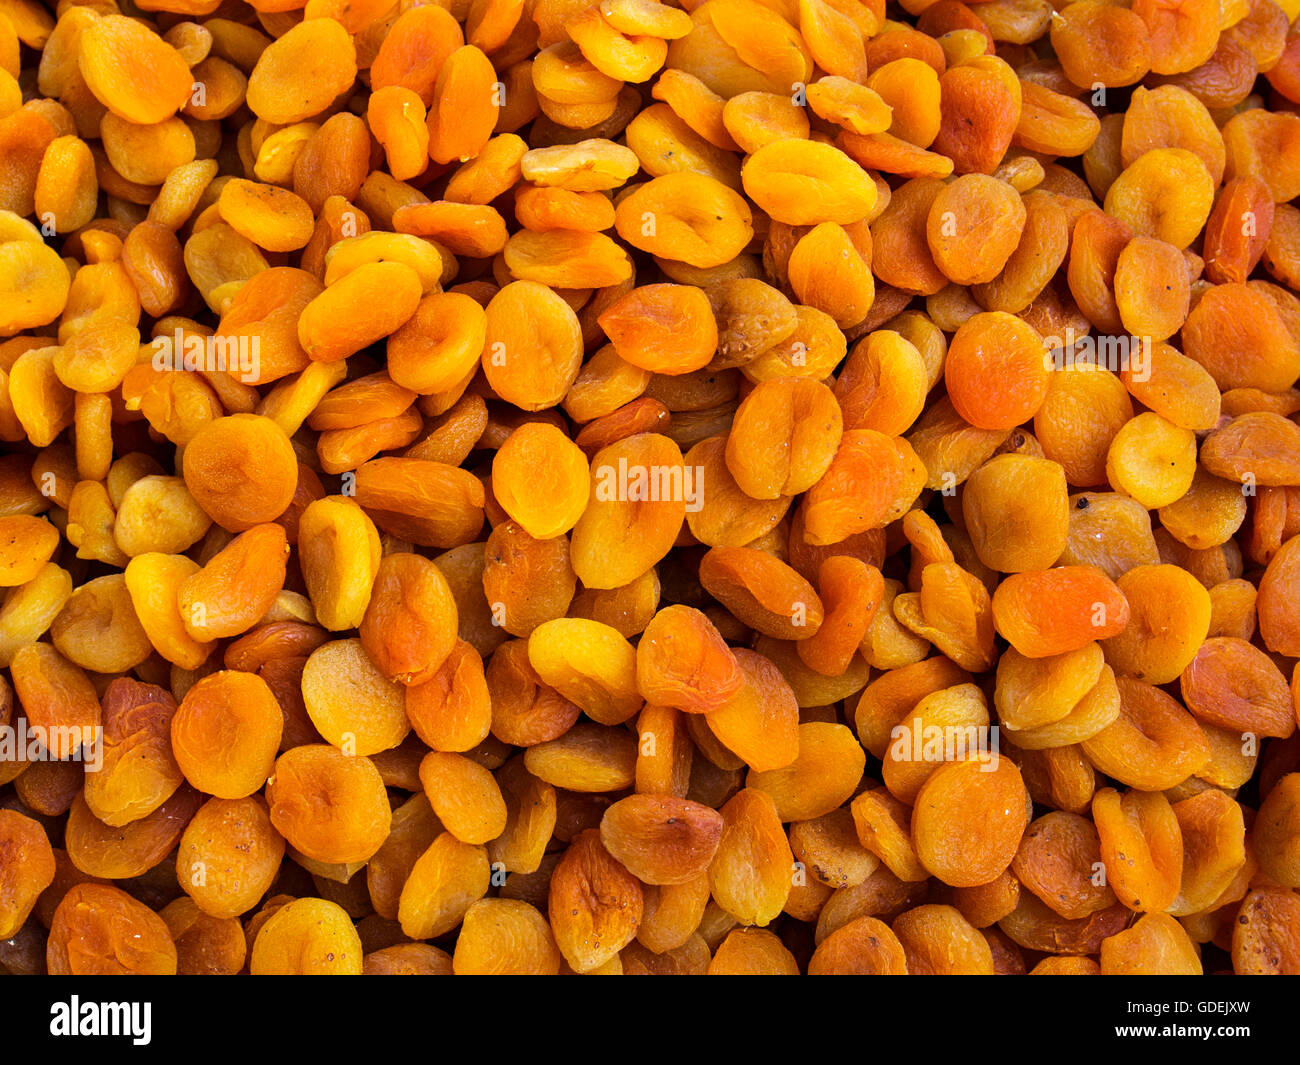 Close-up of dried apricot fruit in market Stock Photo